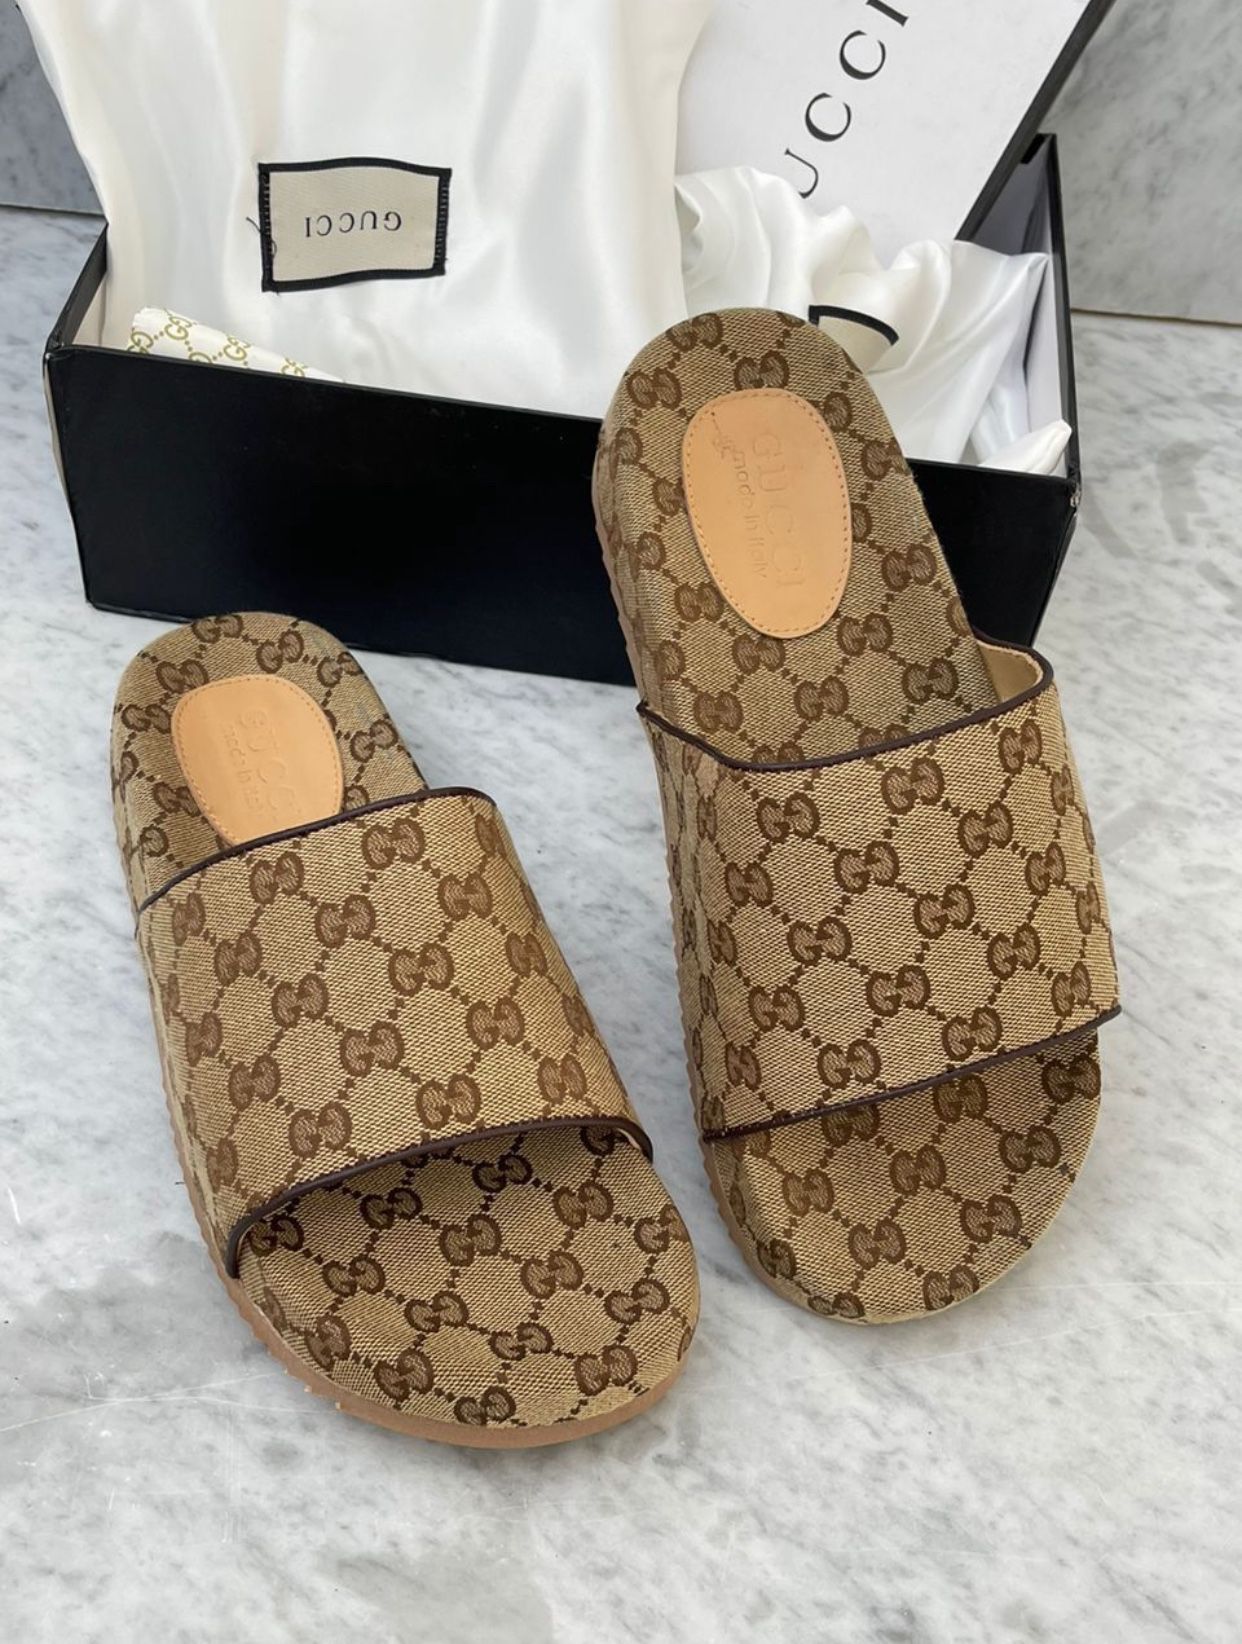 Gucci Slippers Men Size 8.5